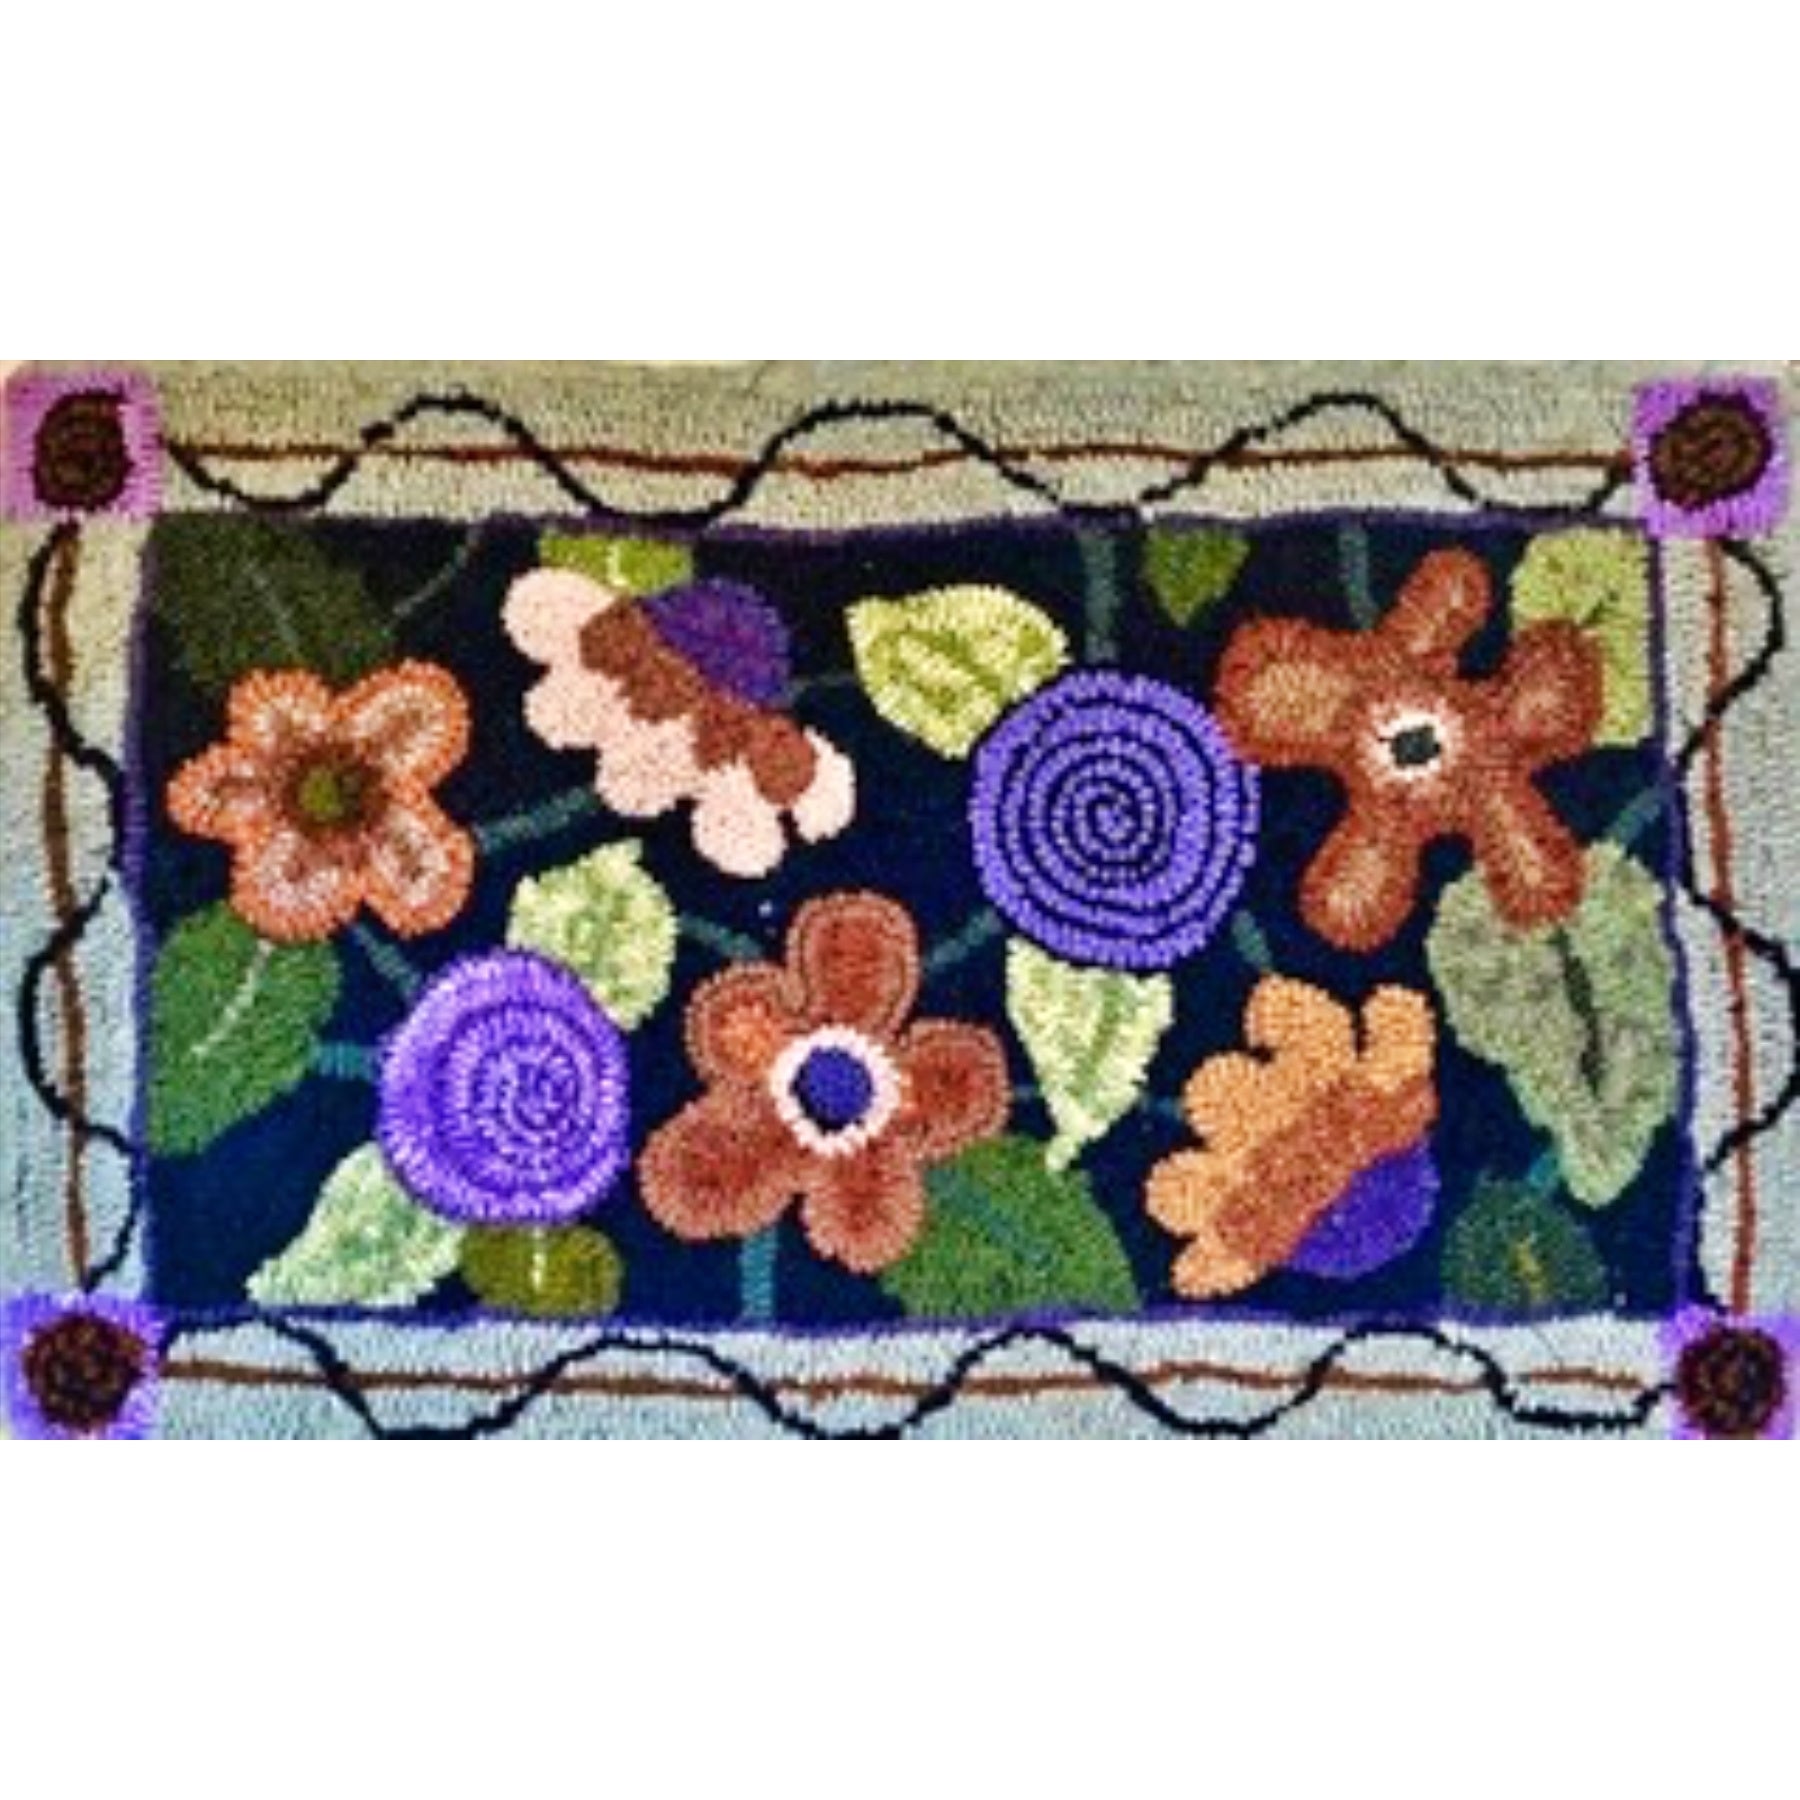 Stephanie's Garden, rug hooked by Vicki Rudolph